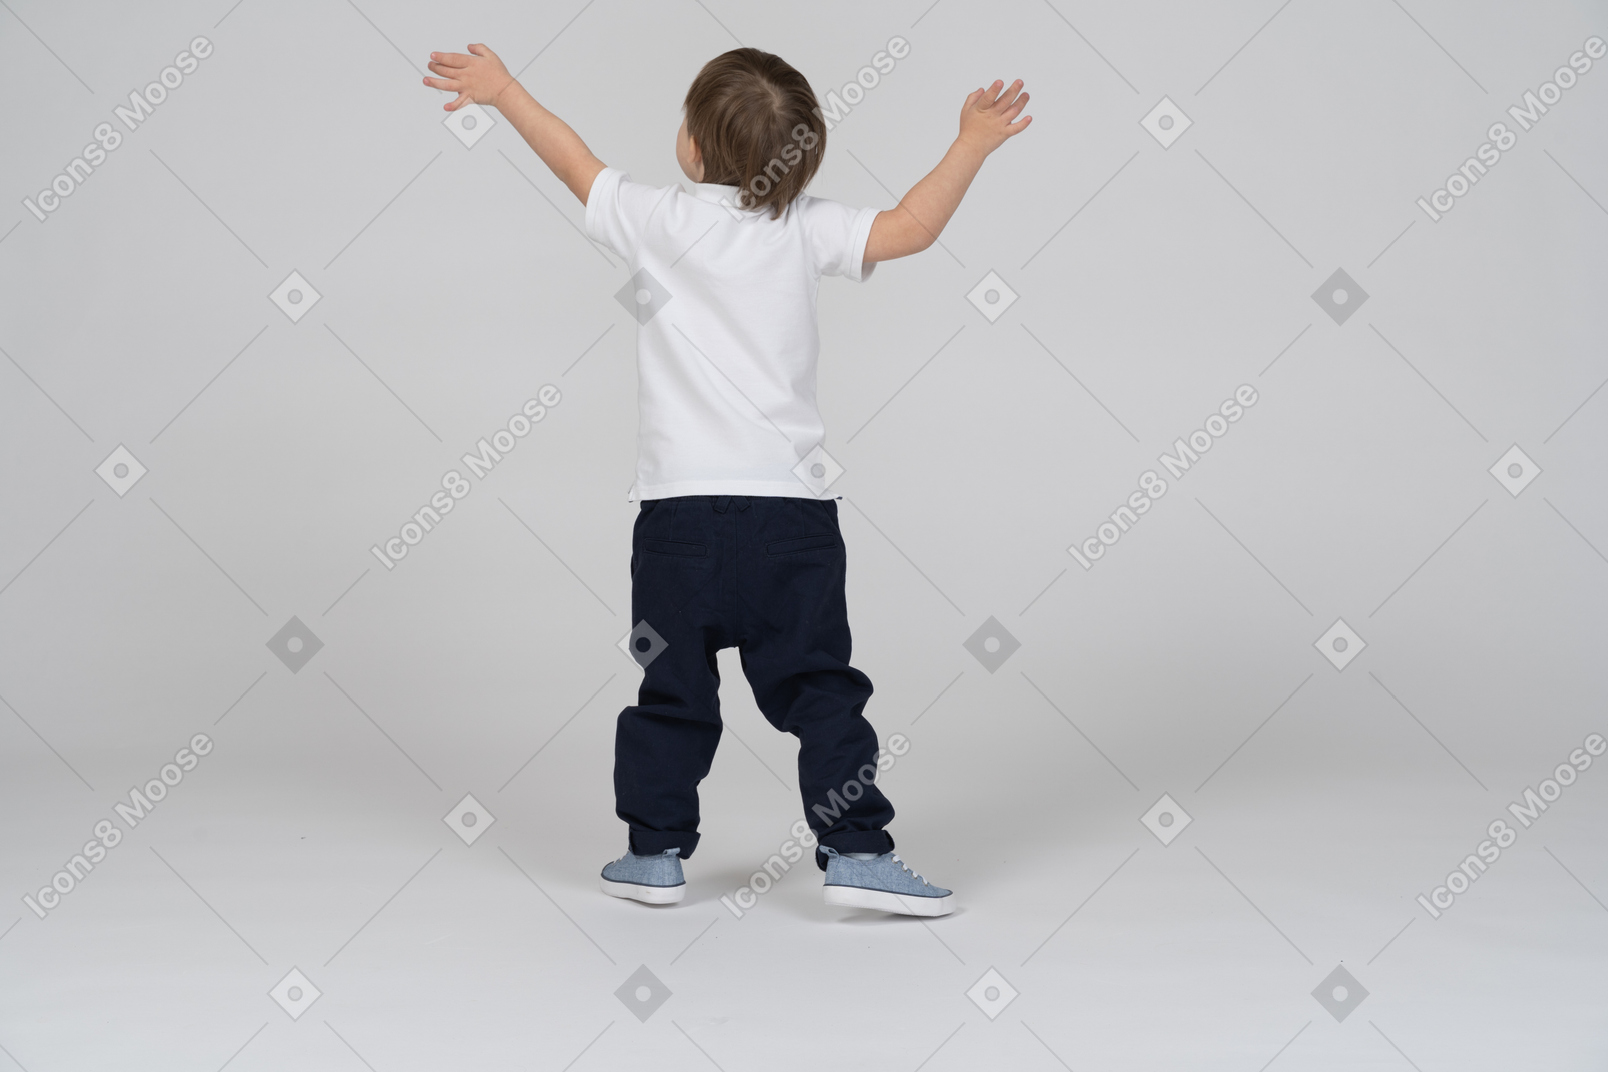 Back view of a little boy standing with his arms raised